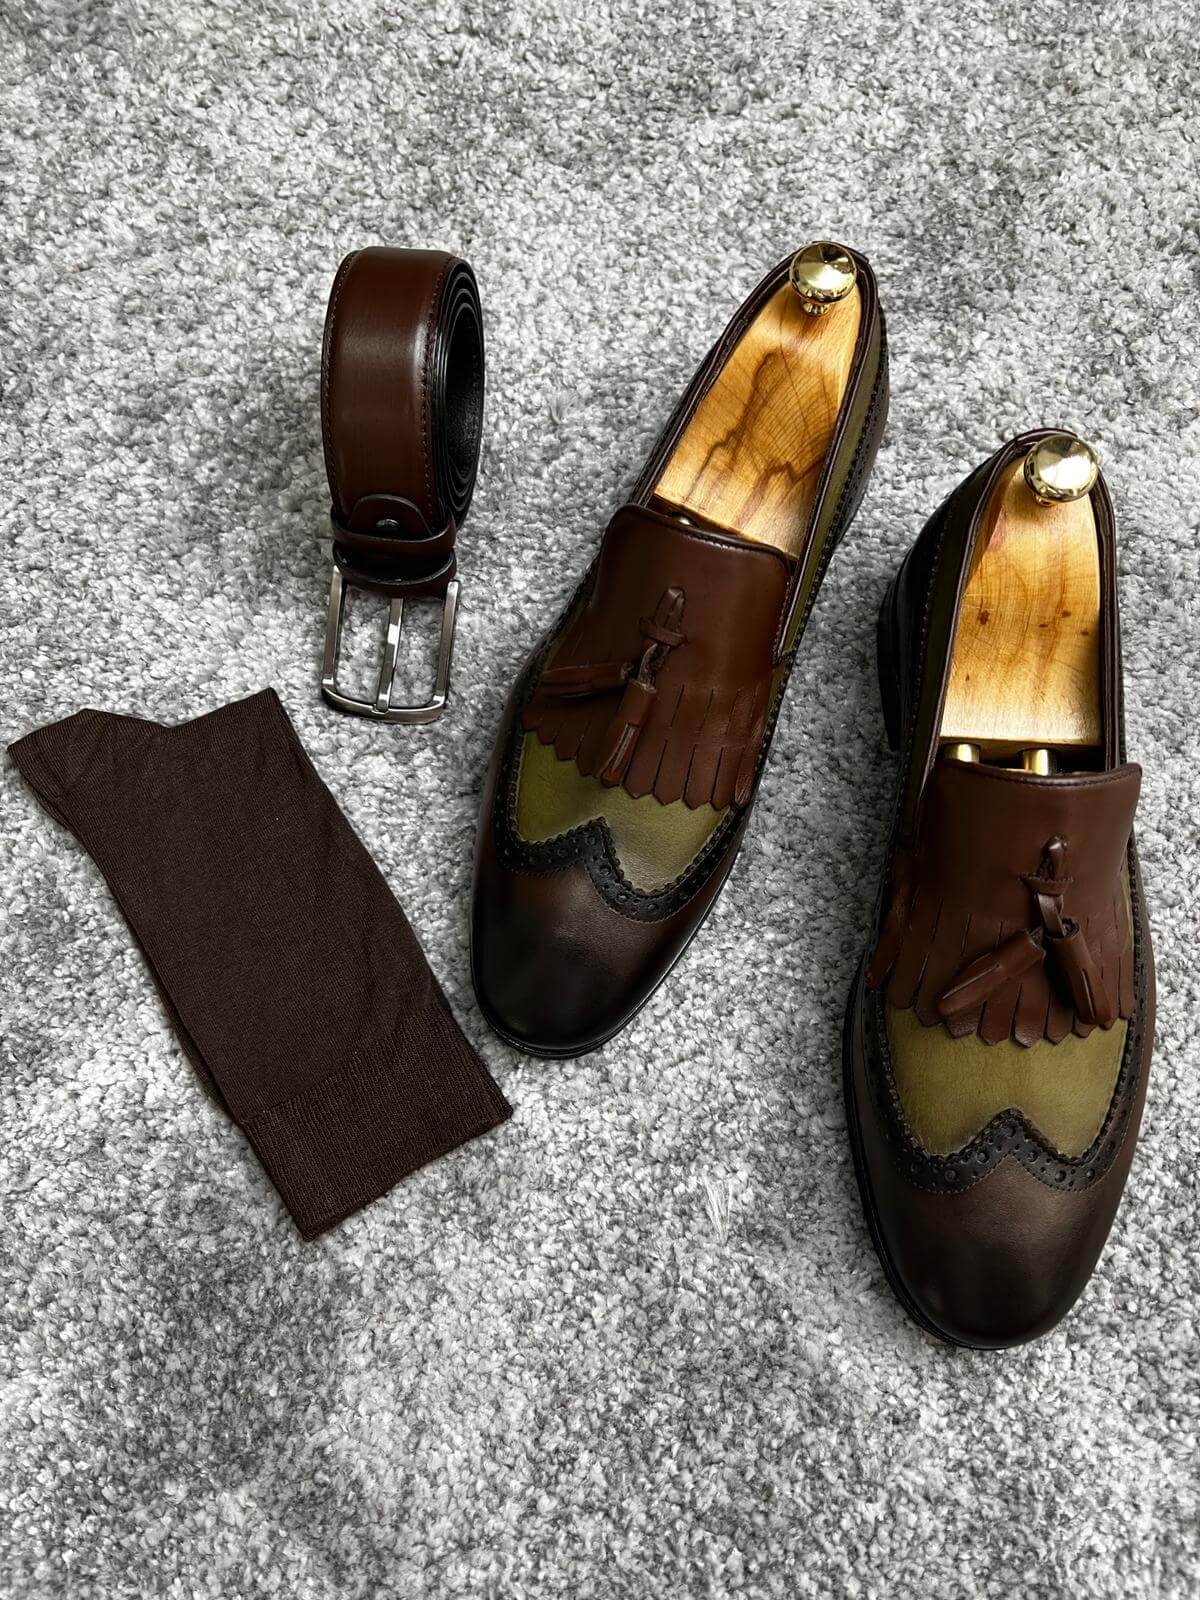 HolloShoe's brown and khaki tassel loafers, featuring 100% leather and neo-lite soles.